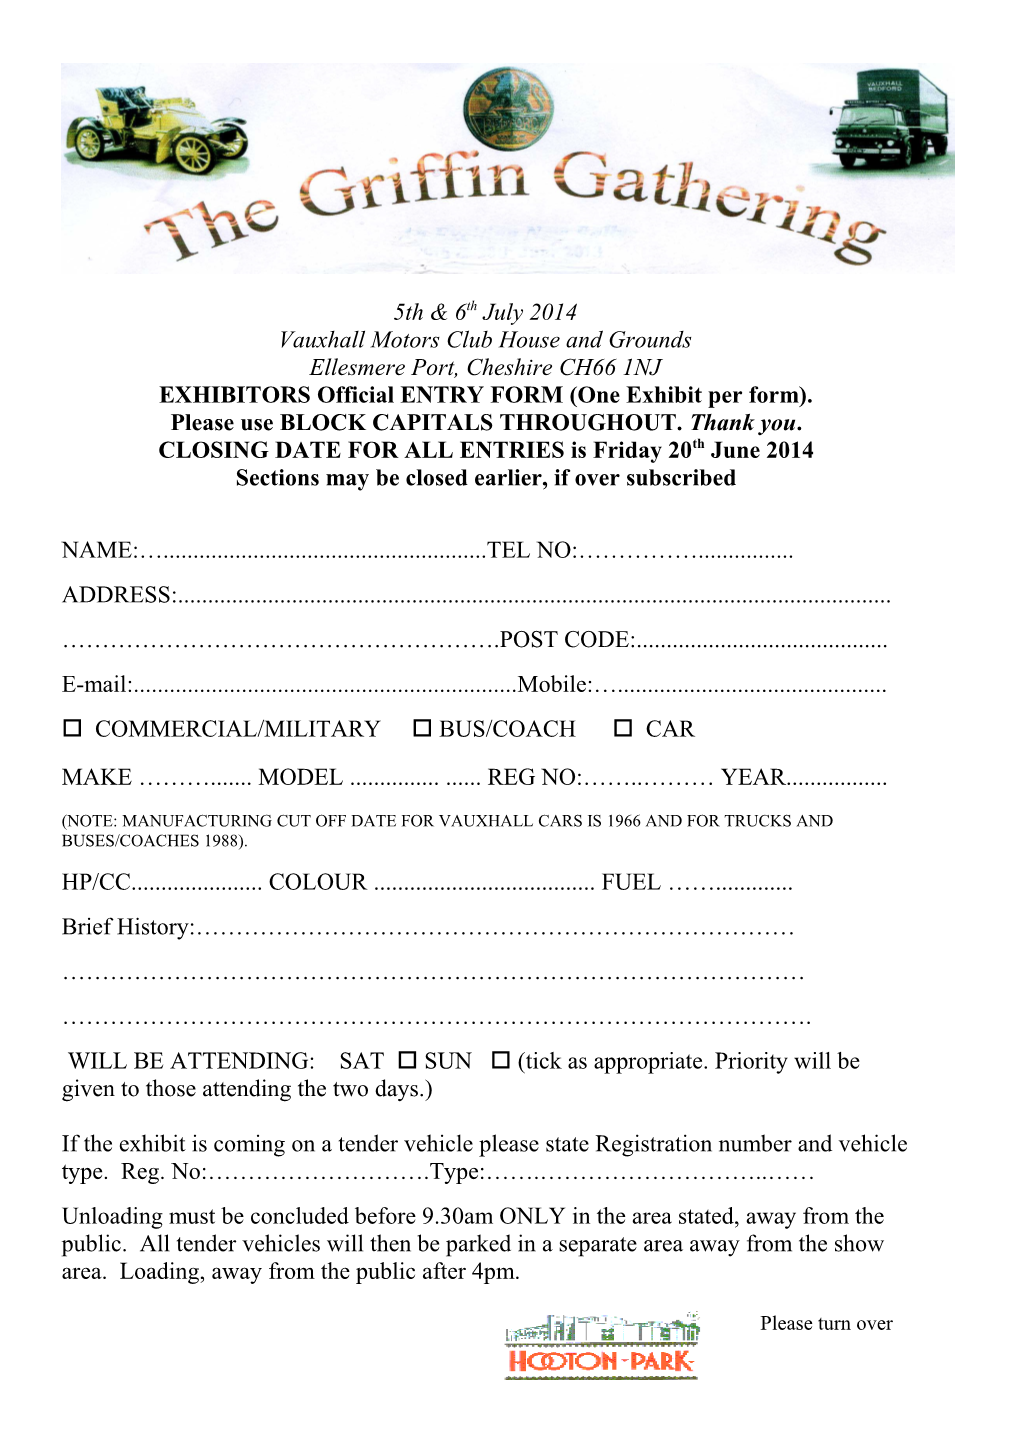 EXHIBITORS Official ENTRY FORM (One Exhibit Per Form)